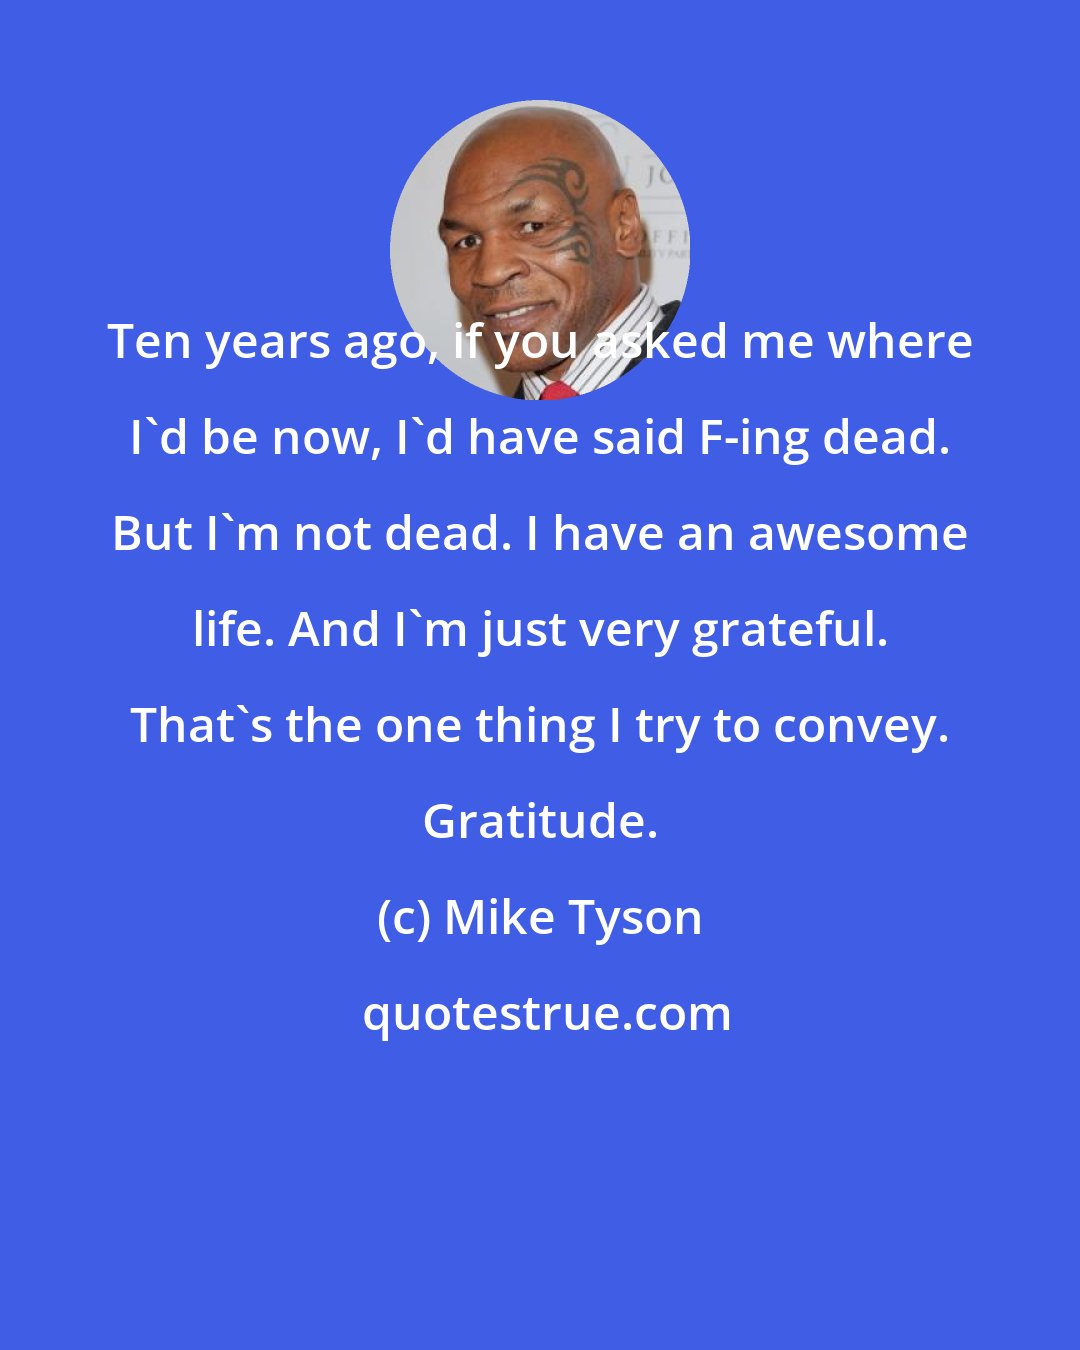 Mike Tyson: Ten years ago, if you asked me where I'd be now, I'd have said F-ing dead. But I'm not dead. I have an awesome life. And I'm just very grateful. That's the one thing I try to convey. Gratitude.